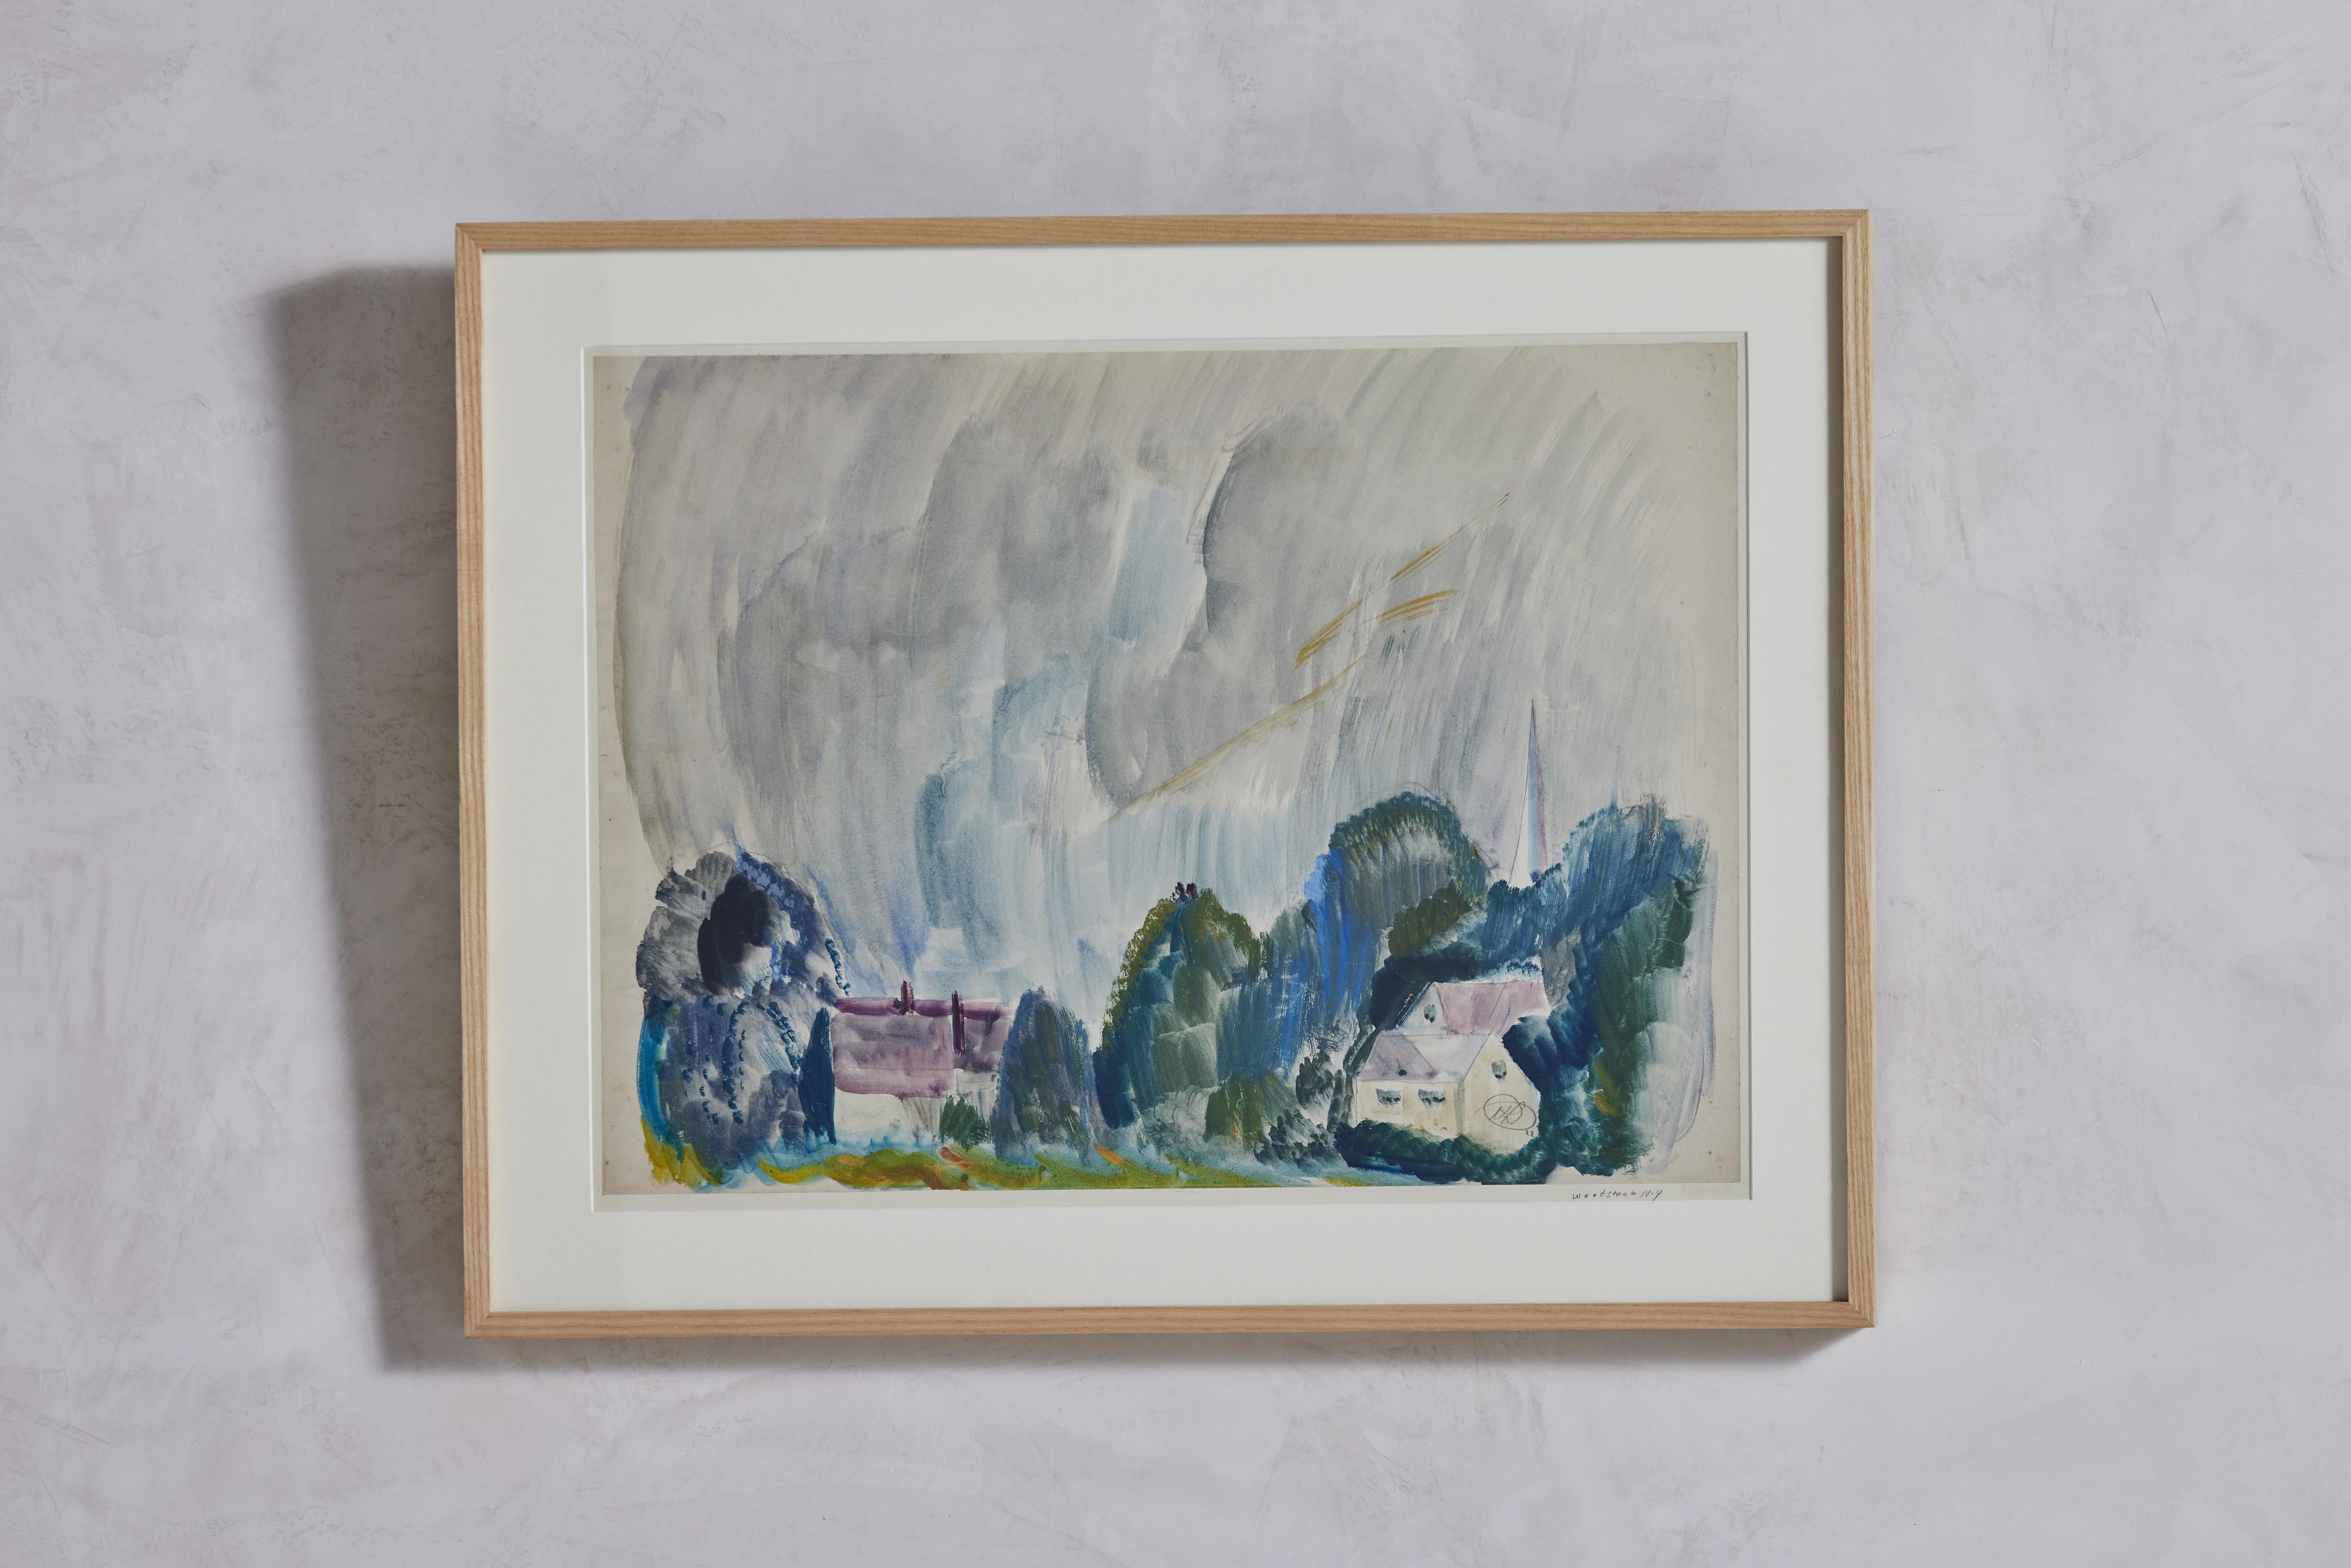 1922 watercolor painting entitled “Storm in Woodstock” by Hayley Lever (b.1876). New ash wood frame. Richard Hayley Lever (28 September 1876 – 6 December 1958) was an Australian-American painter, etcher, lecturer and art teacher. His work was part